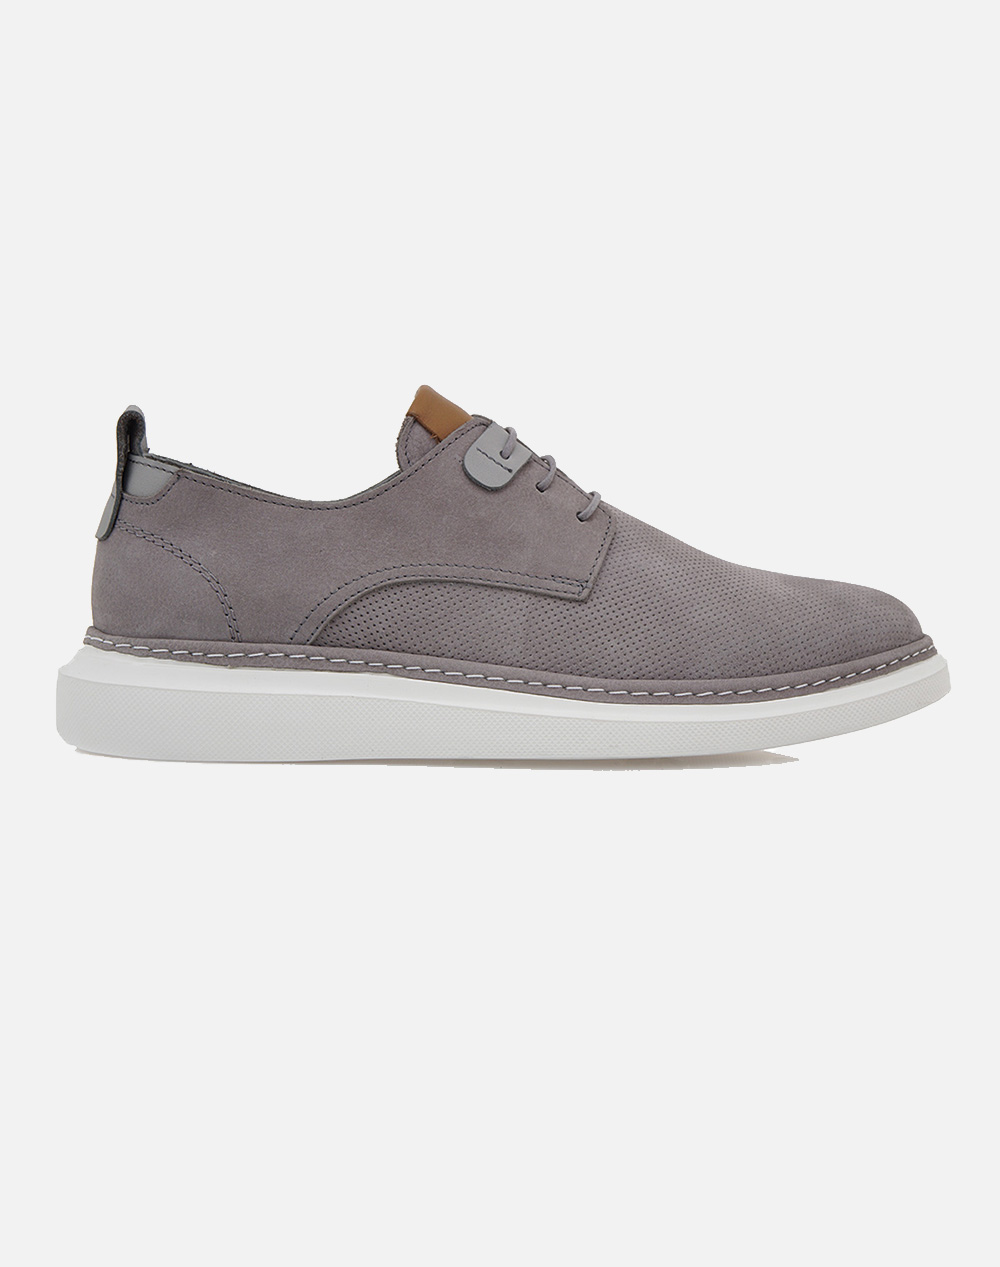 LORENZO RUSSO CASUAL S526S6442565-565 Gray 3820PT-LR6040008_XR19447